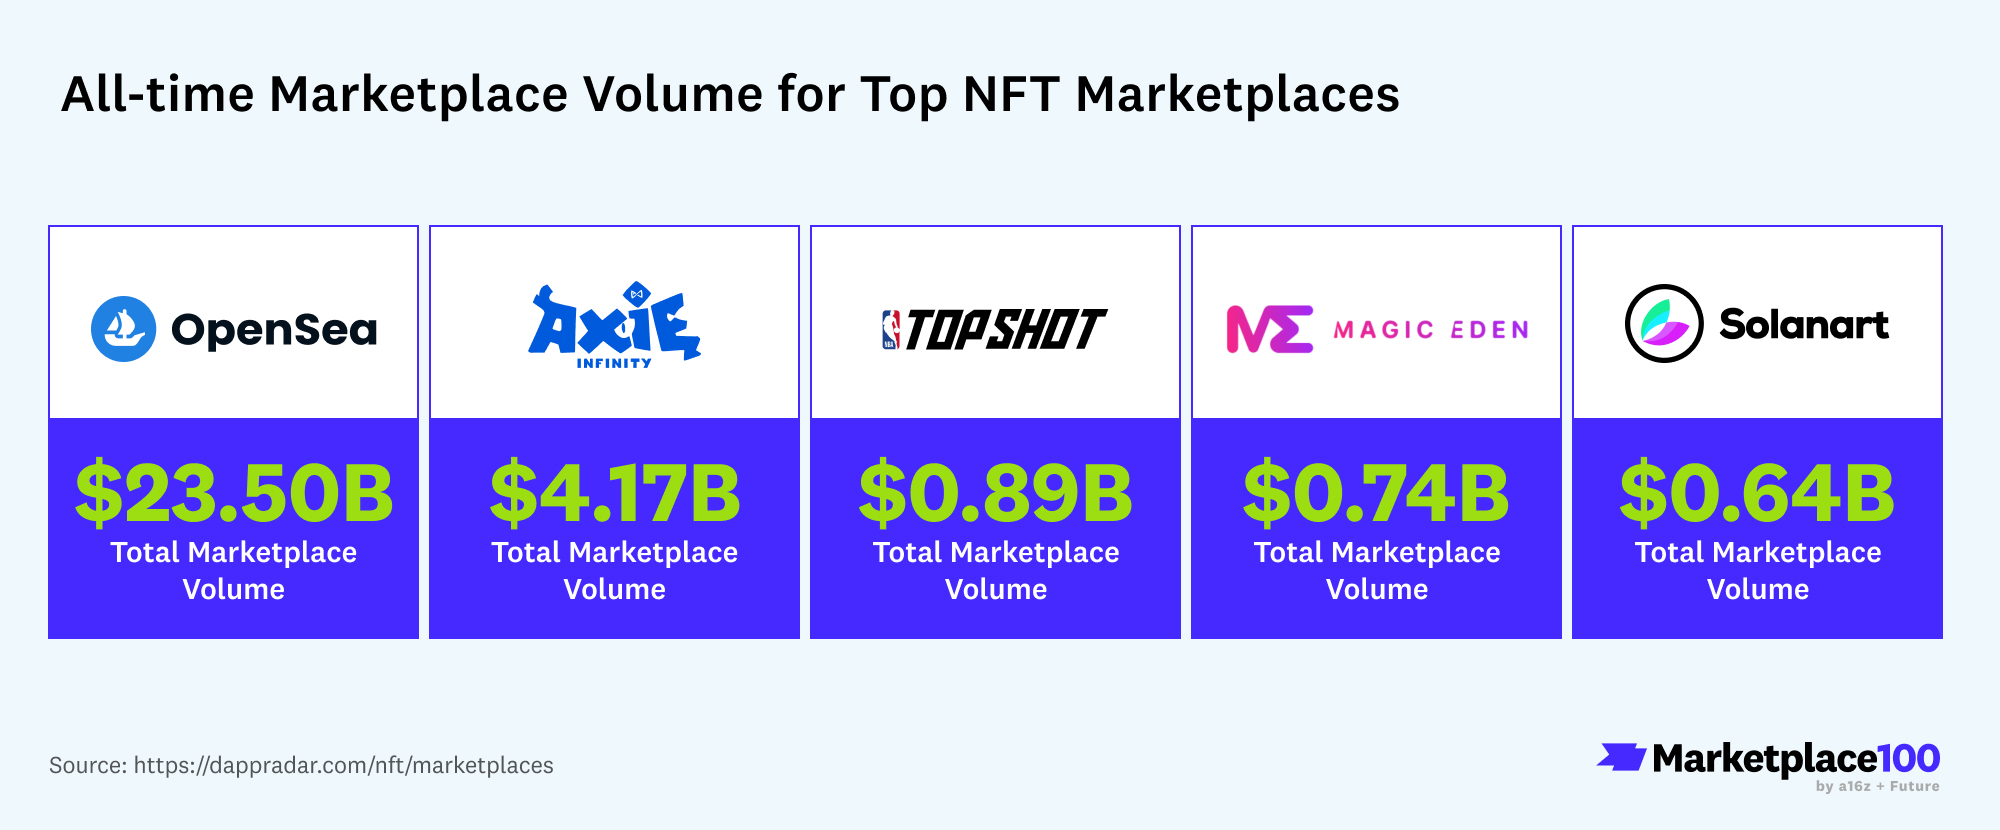 Marketplace 100: All-time Marketplace Volume for Top NFT Marketplaces